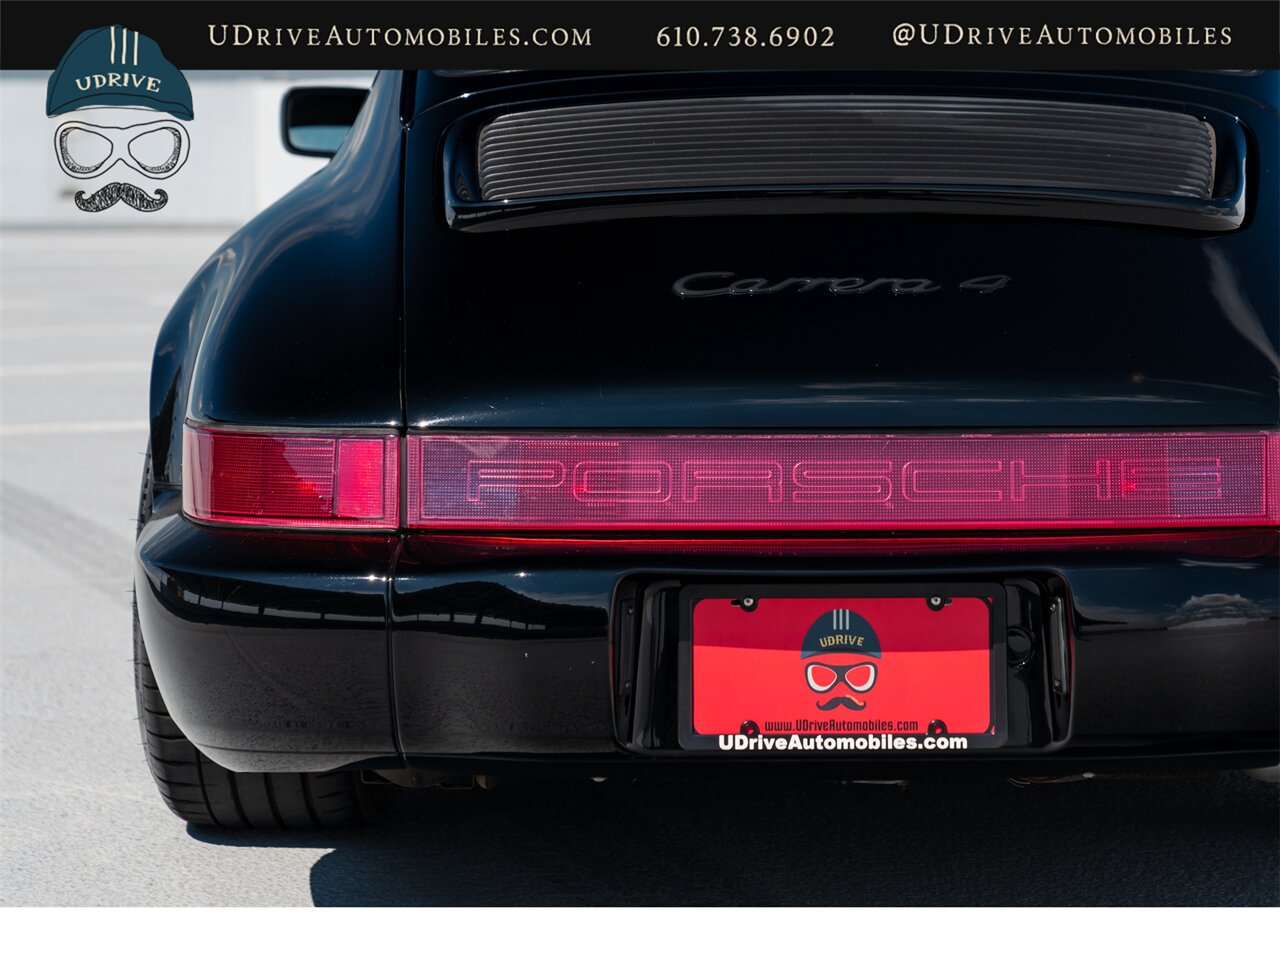 1989 Porsche 911 Carrera 4  964 C4 5 Speed Manual $63k Recent Service and Upgrades - Photo 27 - West Chester, PA 19382